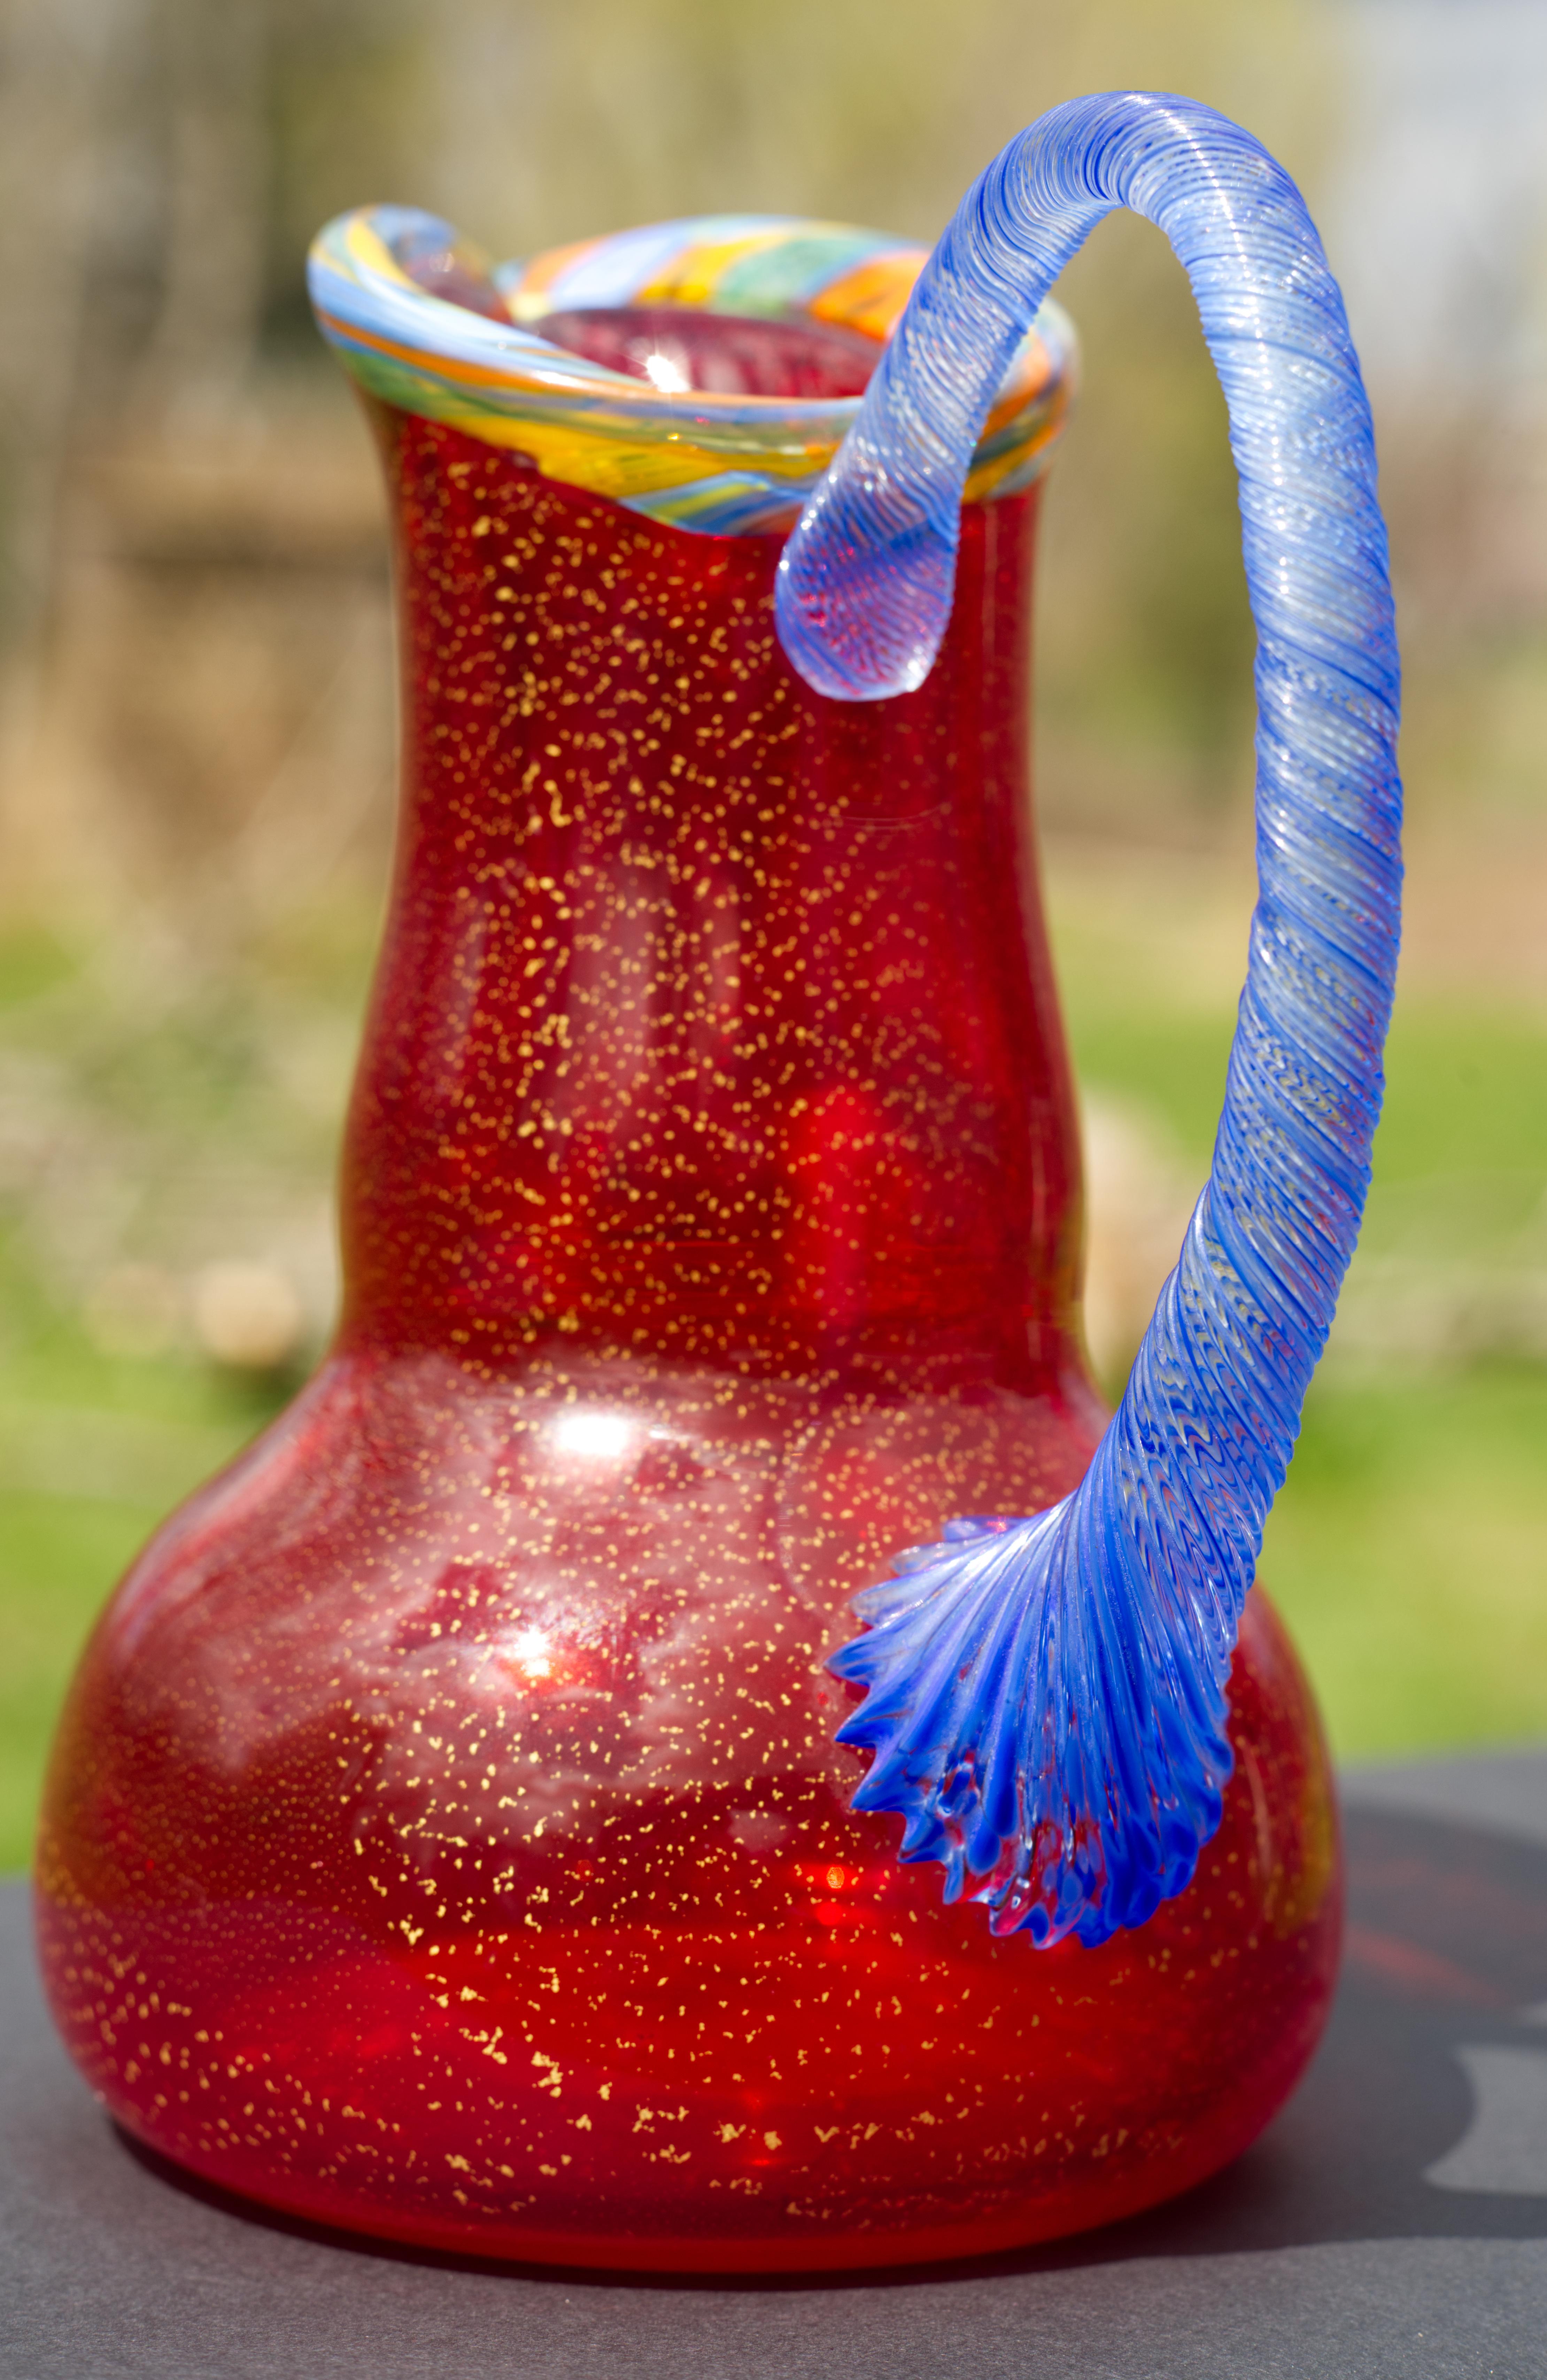 
The pitcher or vase was hand blown by Peter Secrest in Naples, NY. It has ruby red body with gold flakes inclusions throughout; it is decorated with applied textured blue and clear glass handle and striated multicolored collar. The bright, cheerful